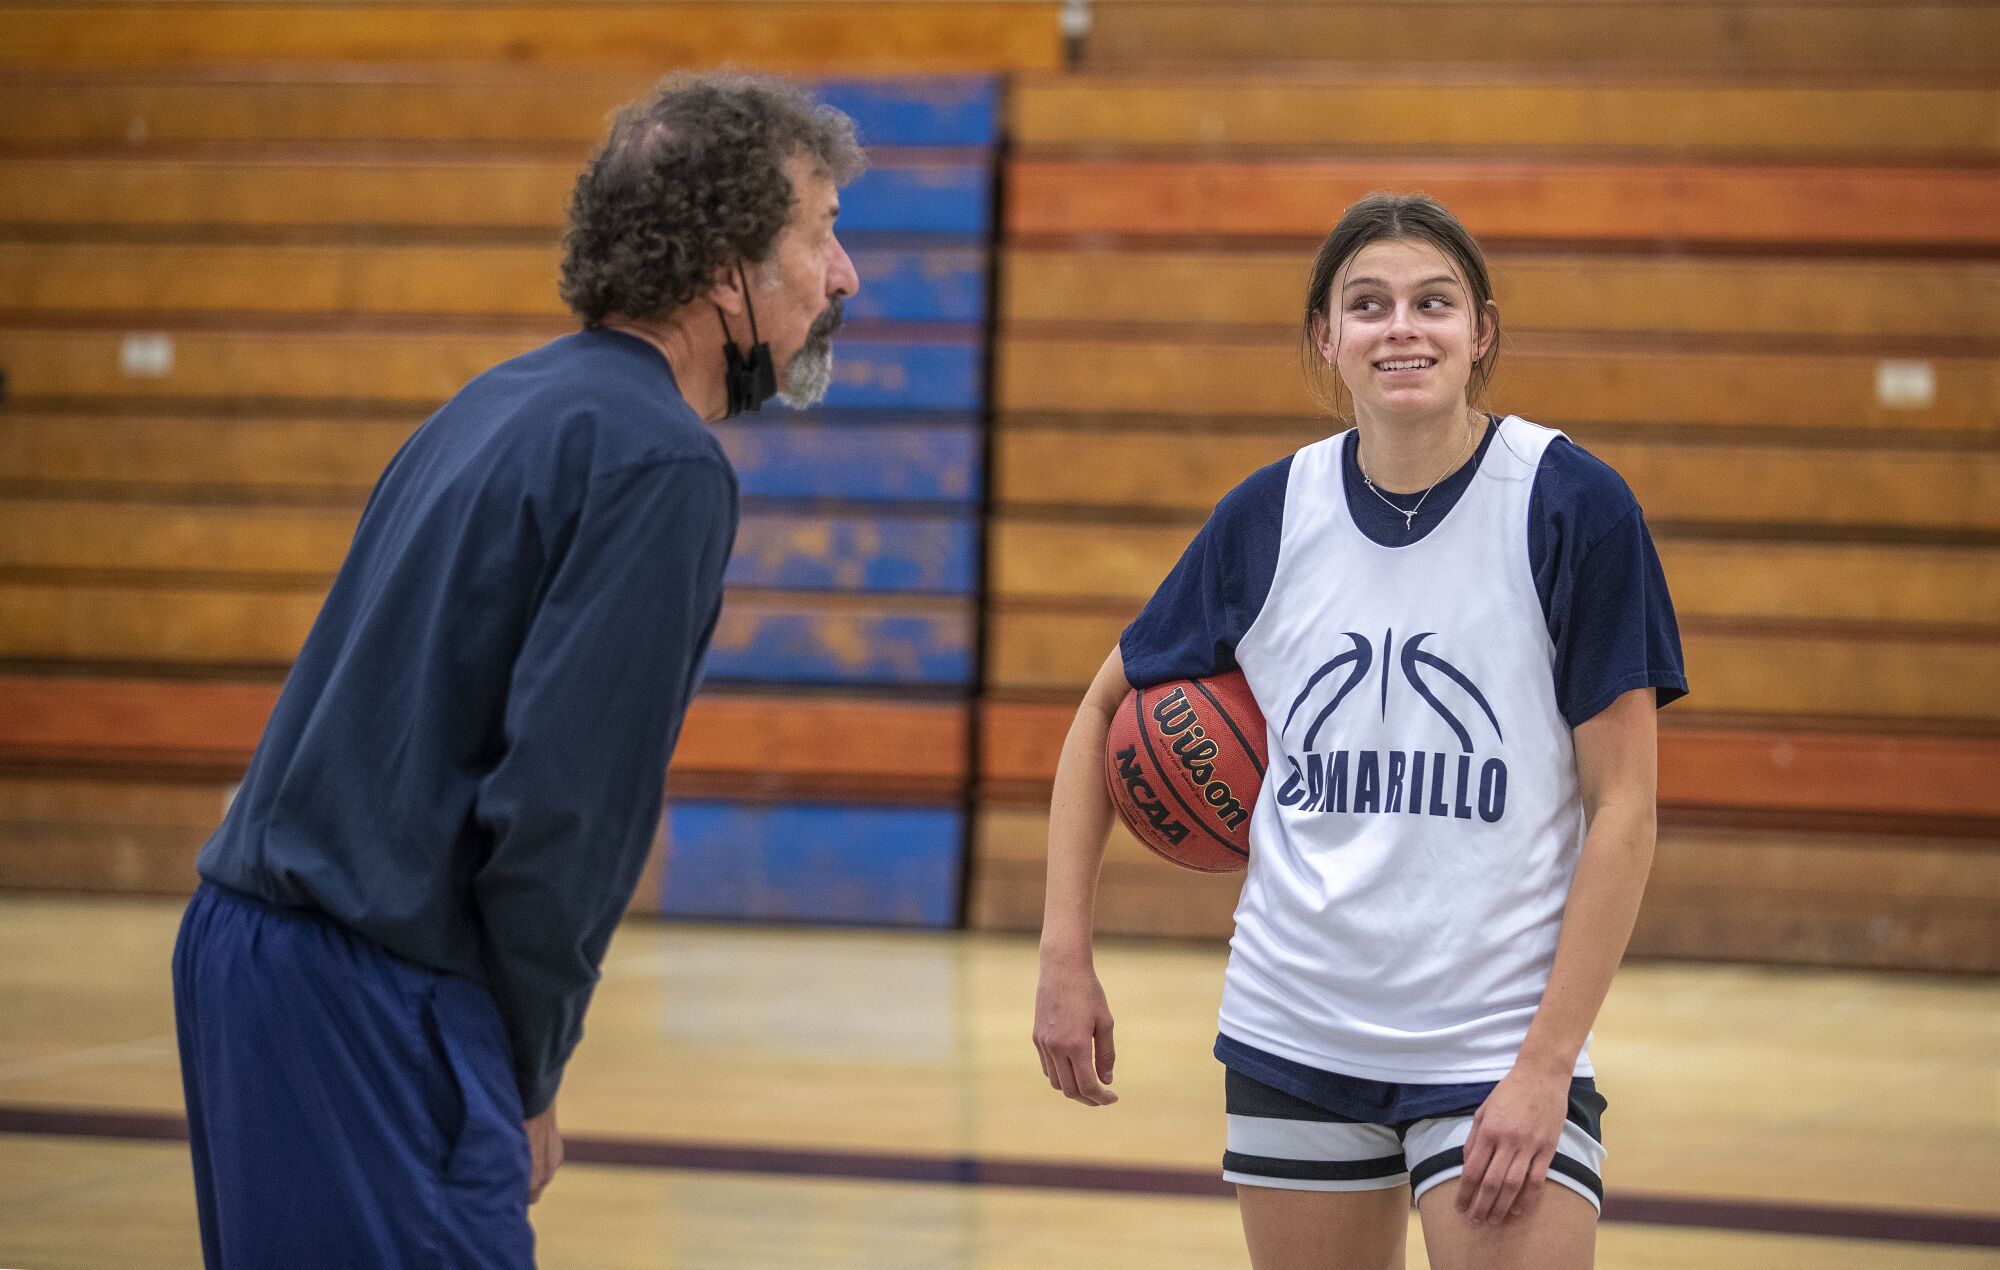 Camarillo coach Mike Prewitt and Gabriela Jaquez chat during a practice.